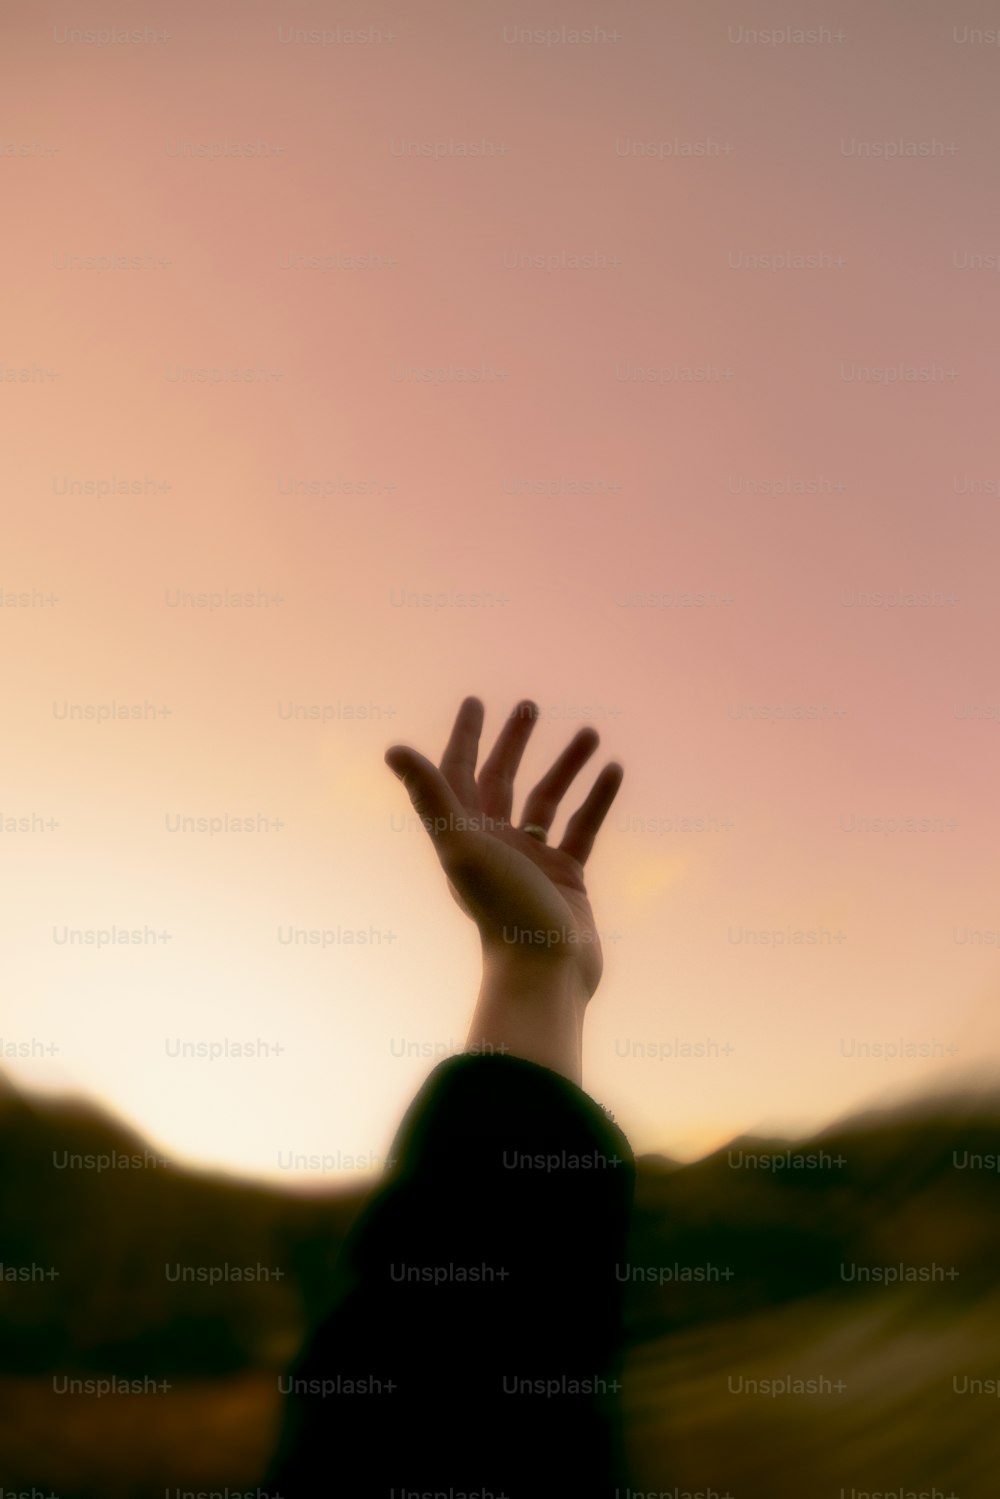 a blurry photo of a hand reaching up into the sky